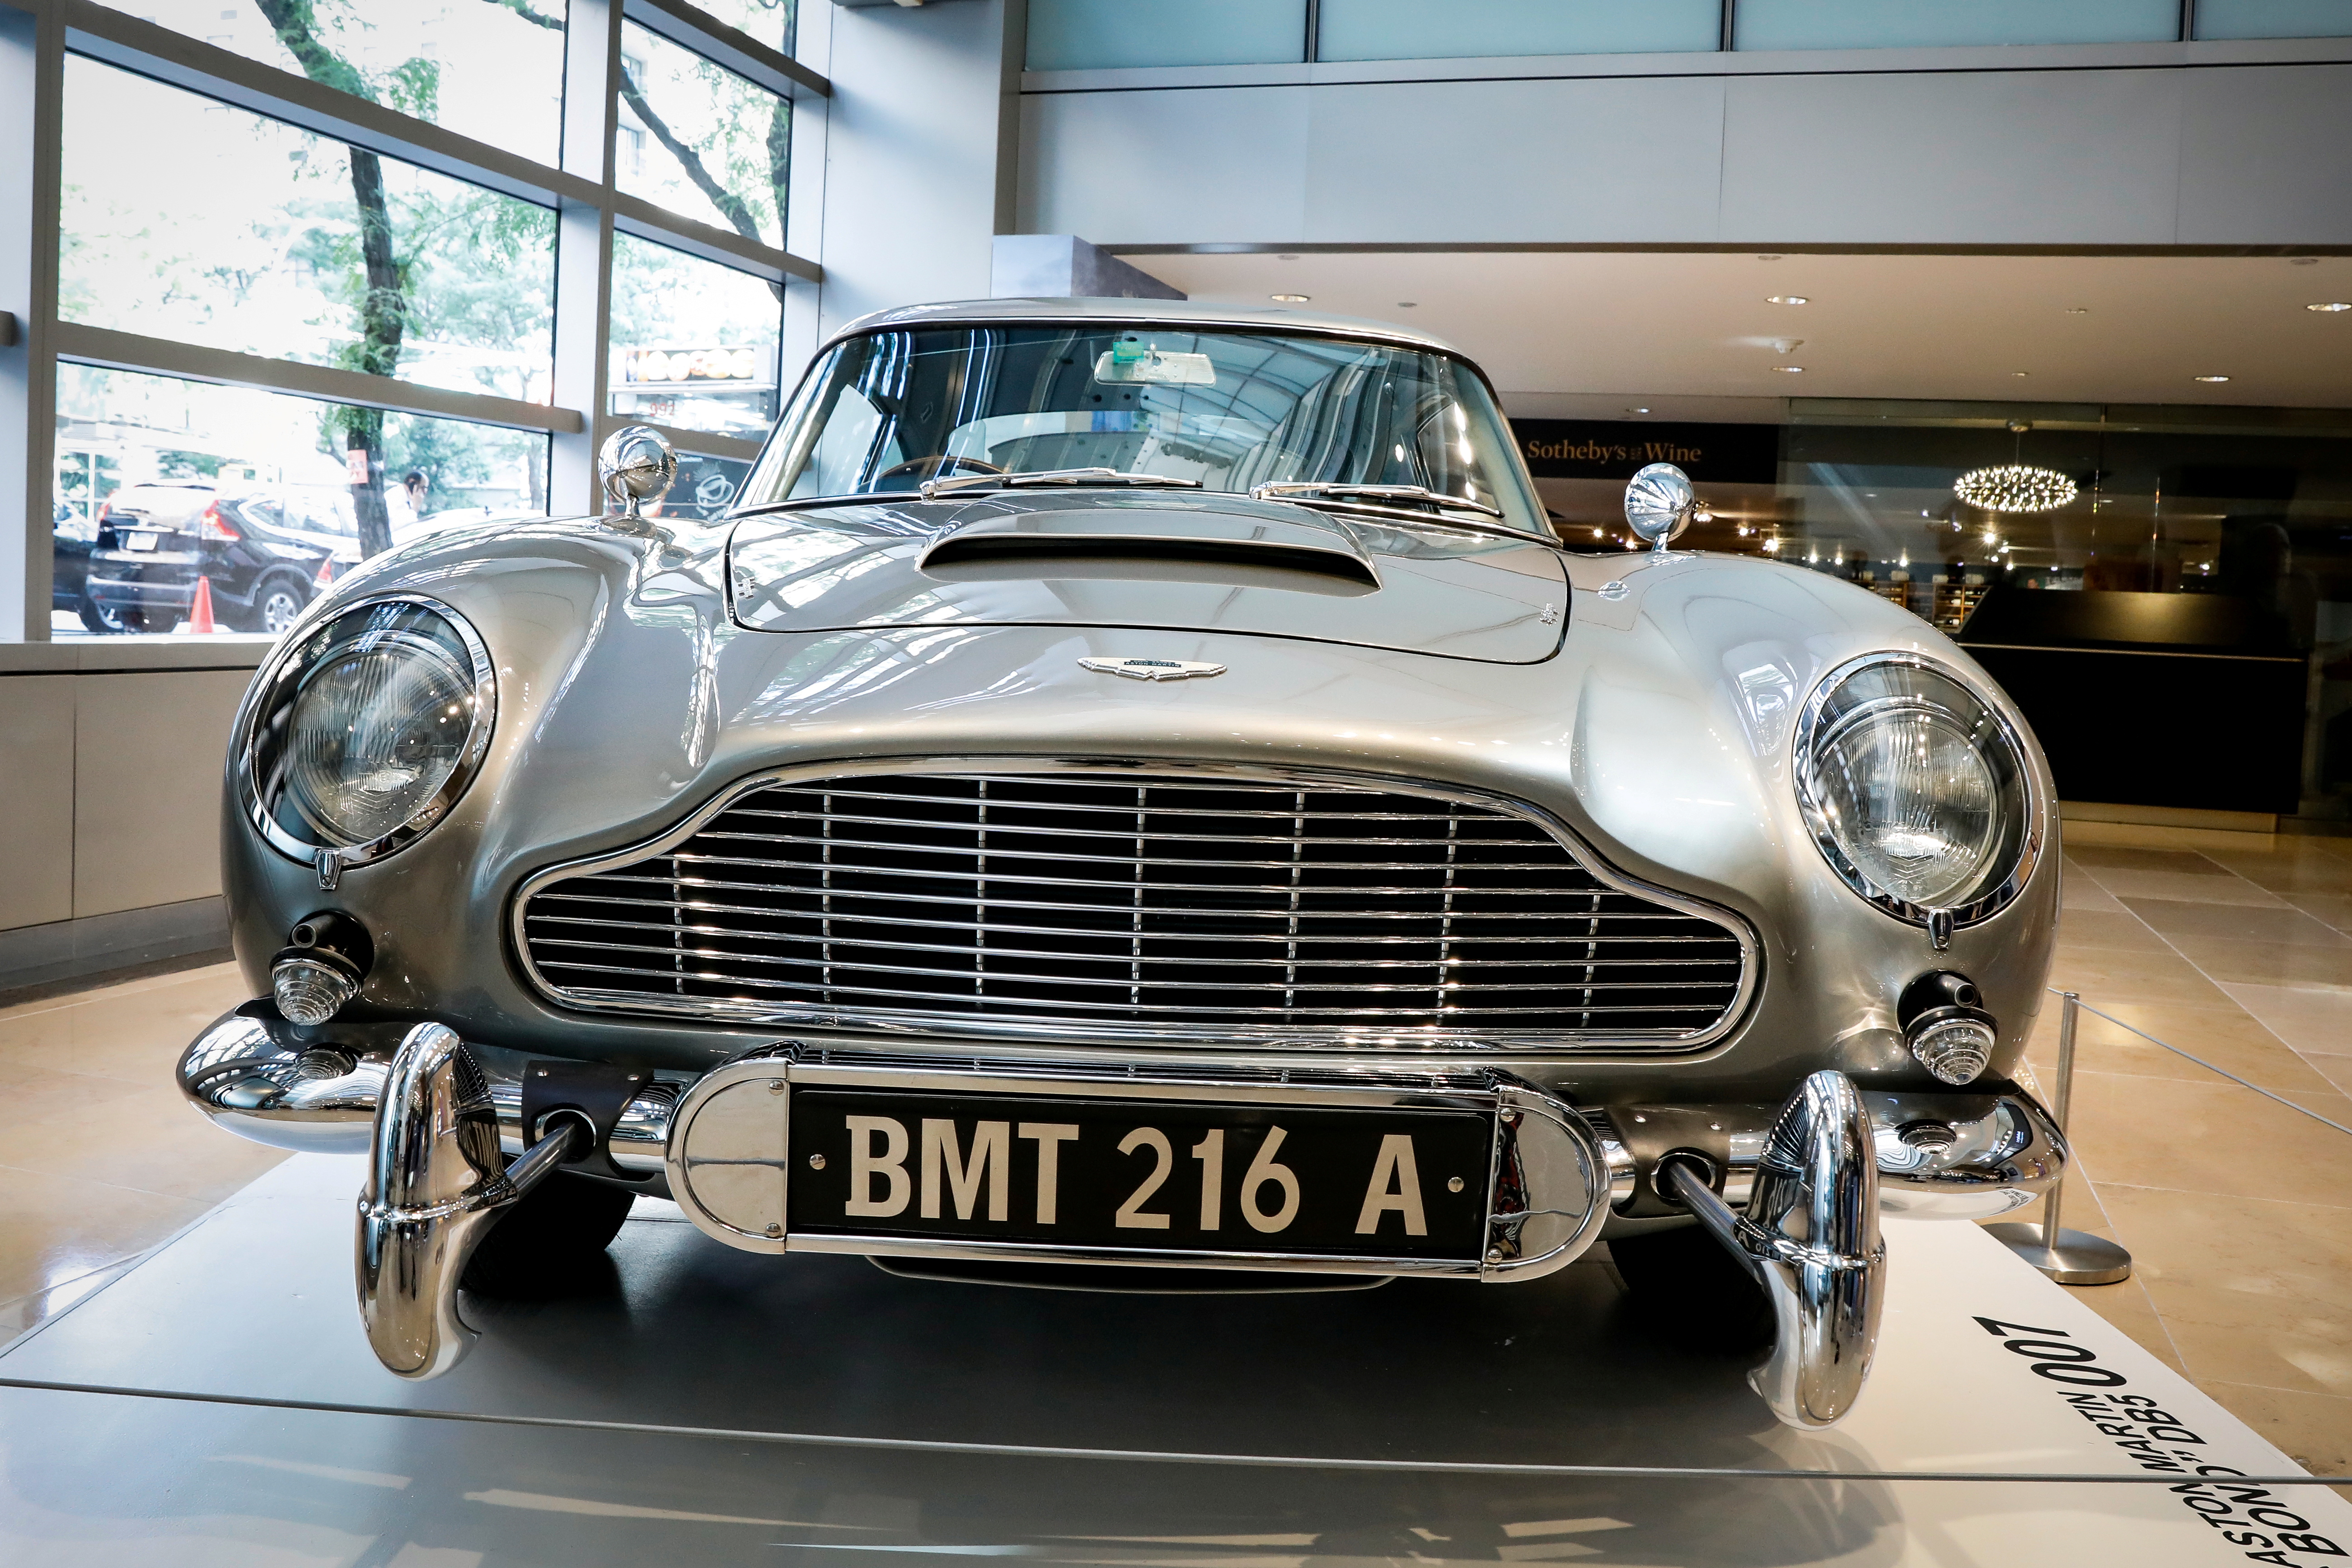 A James Bond 1965 Aston Martin DB5 coupe is displayed at Sotheby's auction house in New York, U.S.